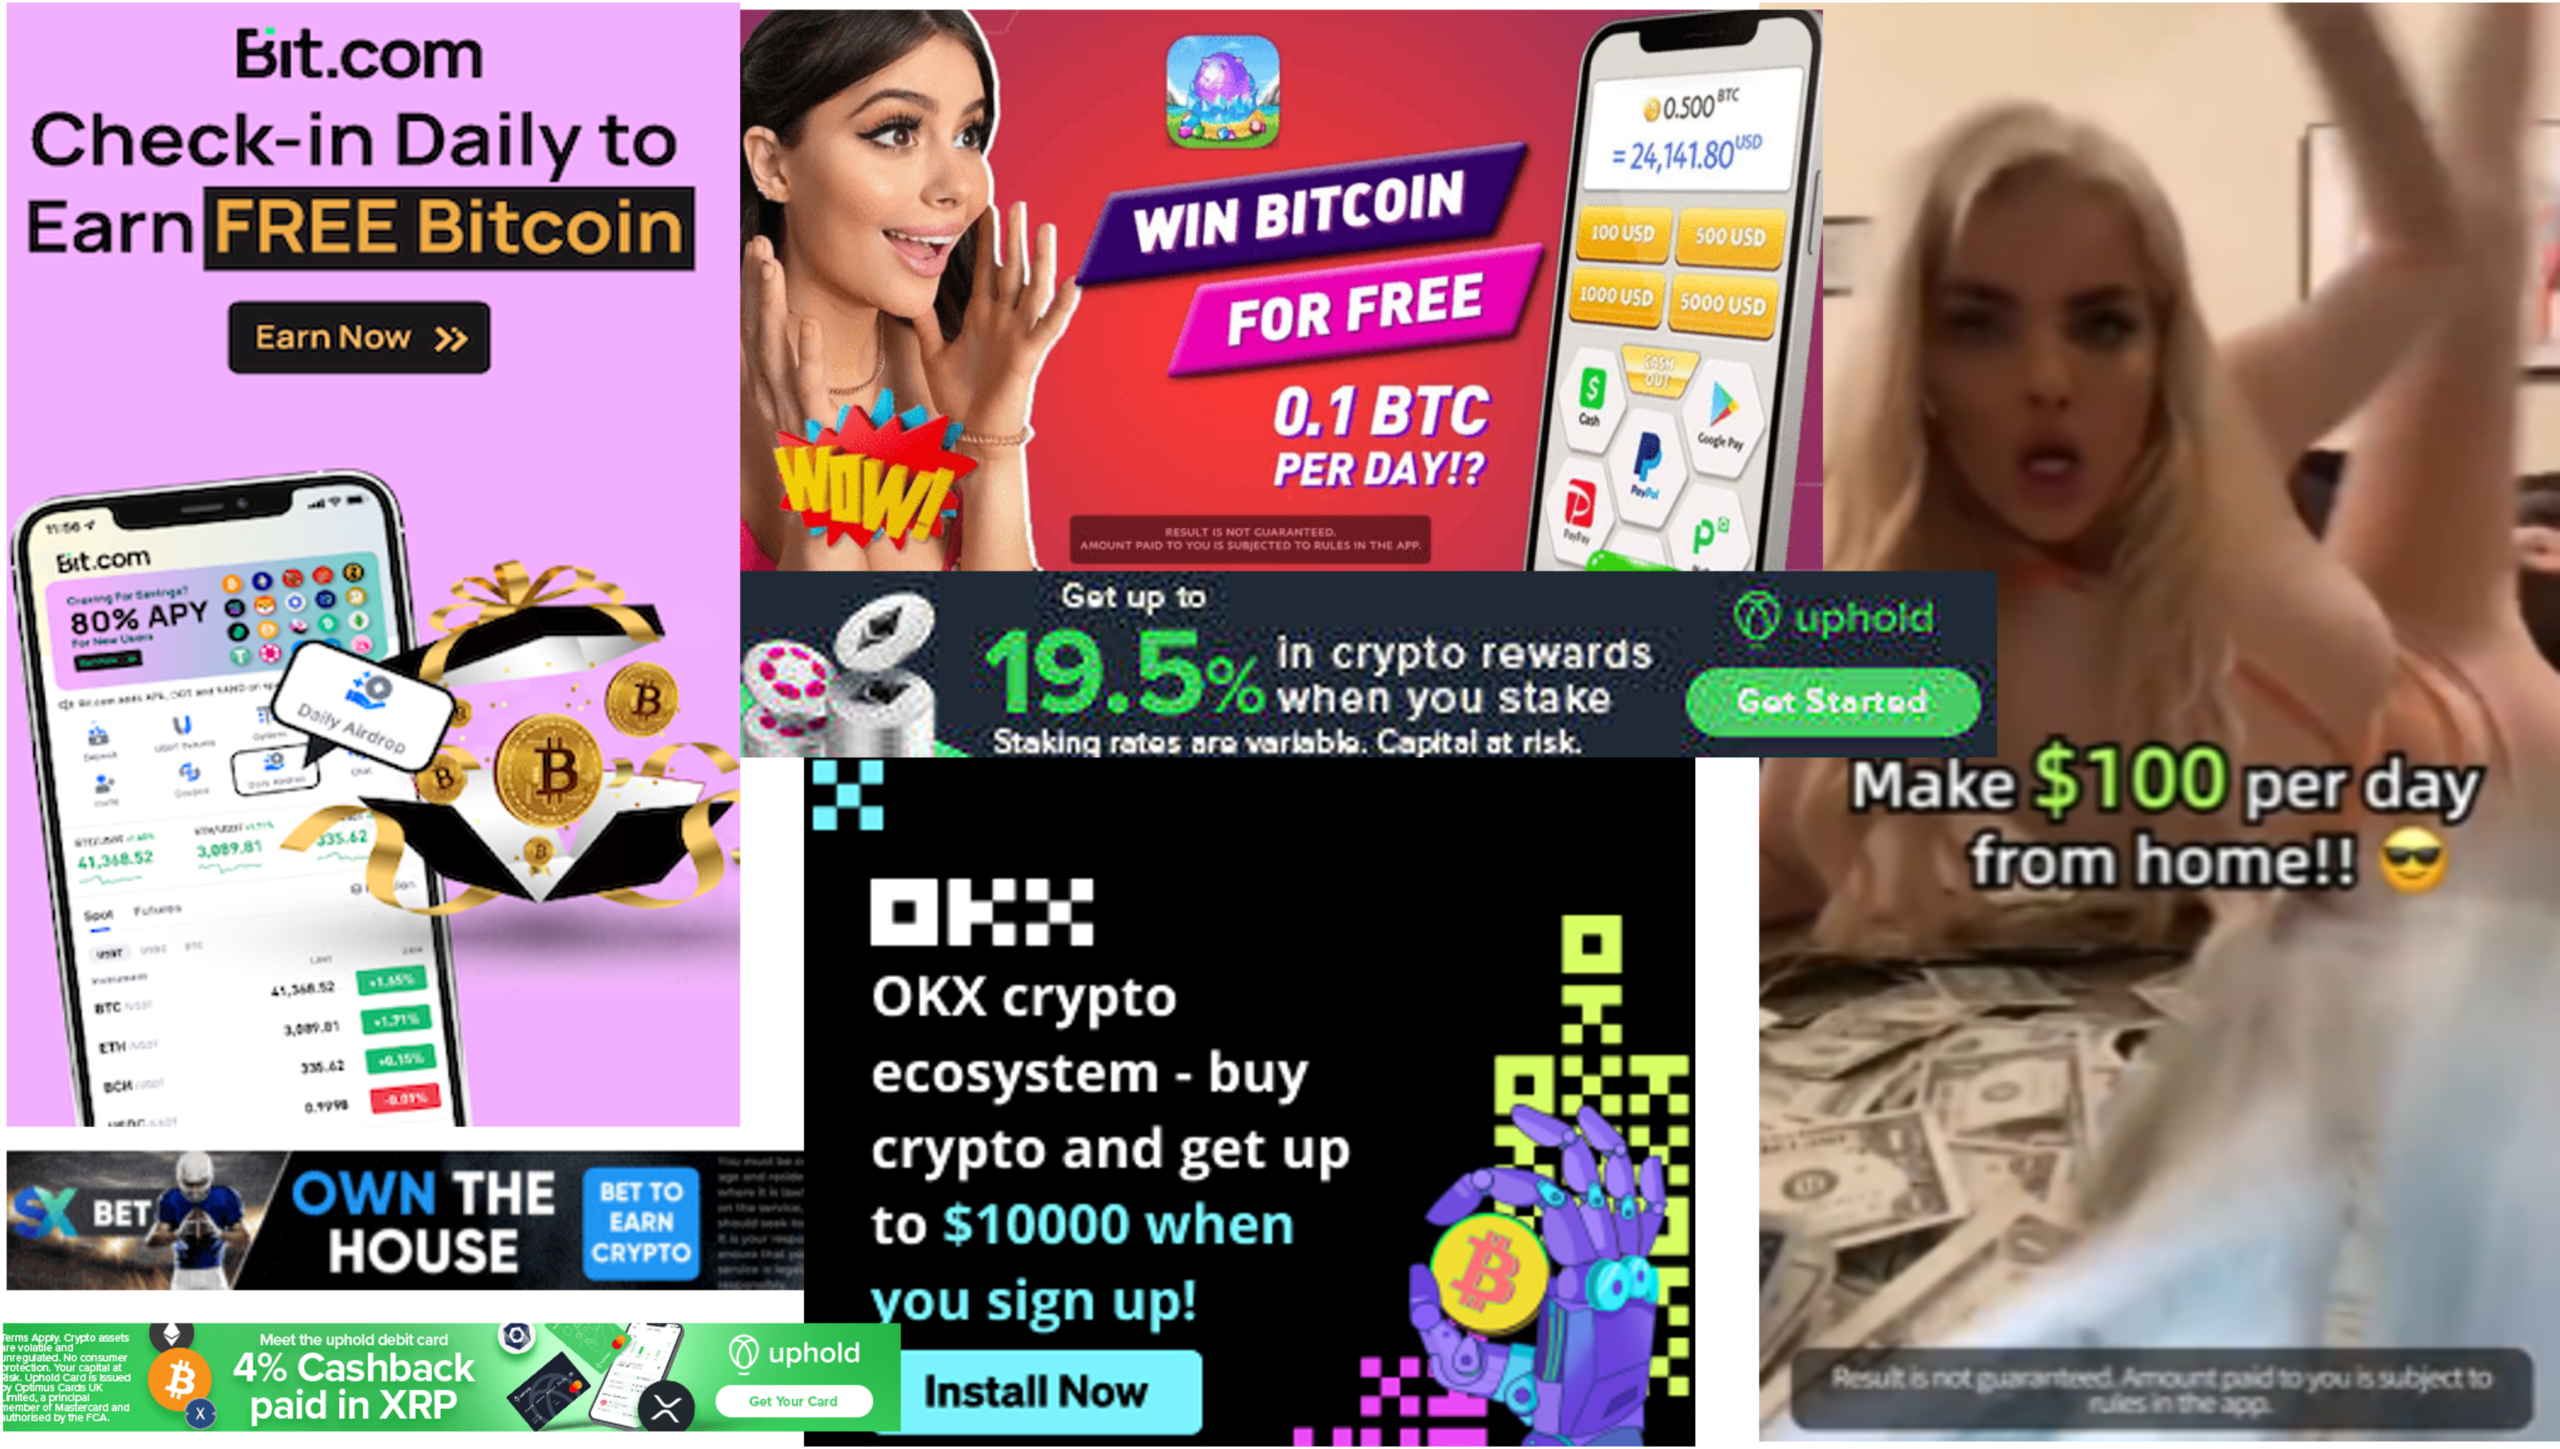 Cryptocurrency ads with questionable content.